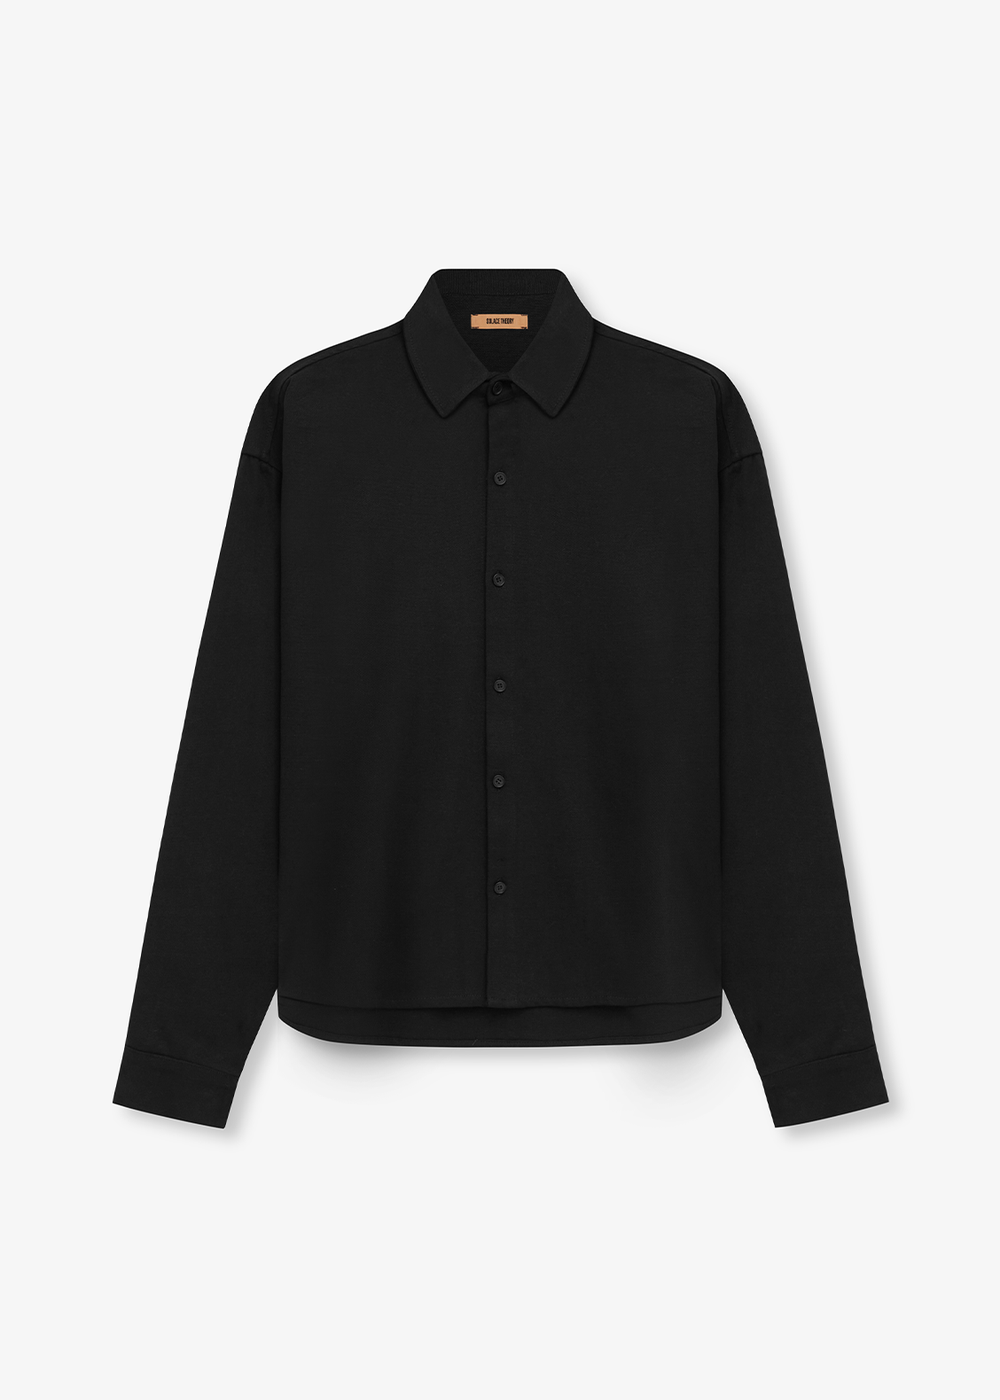 Solace Theory - Cotton Canvas Shirt / Black | SOLACE THEORY | Mad About The Boy